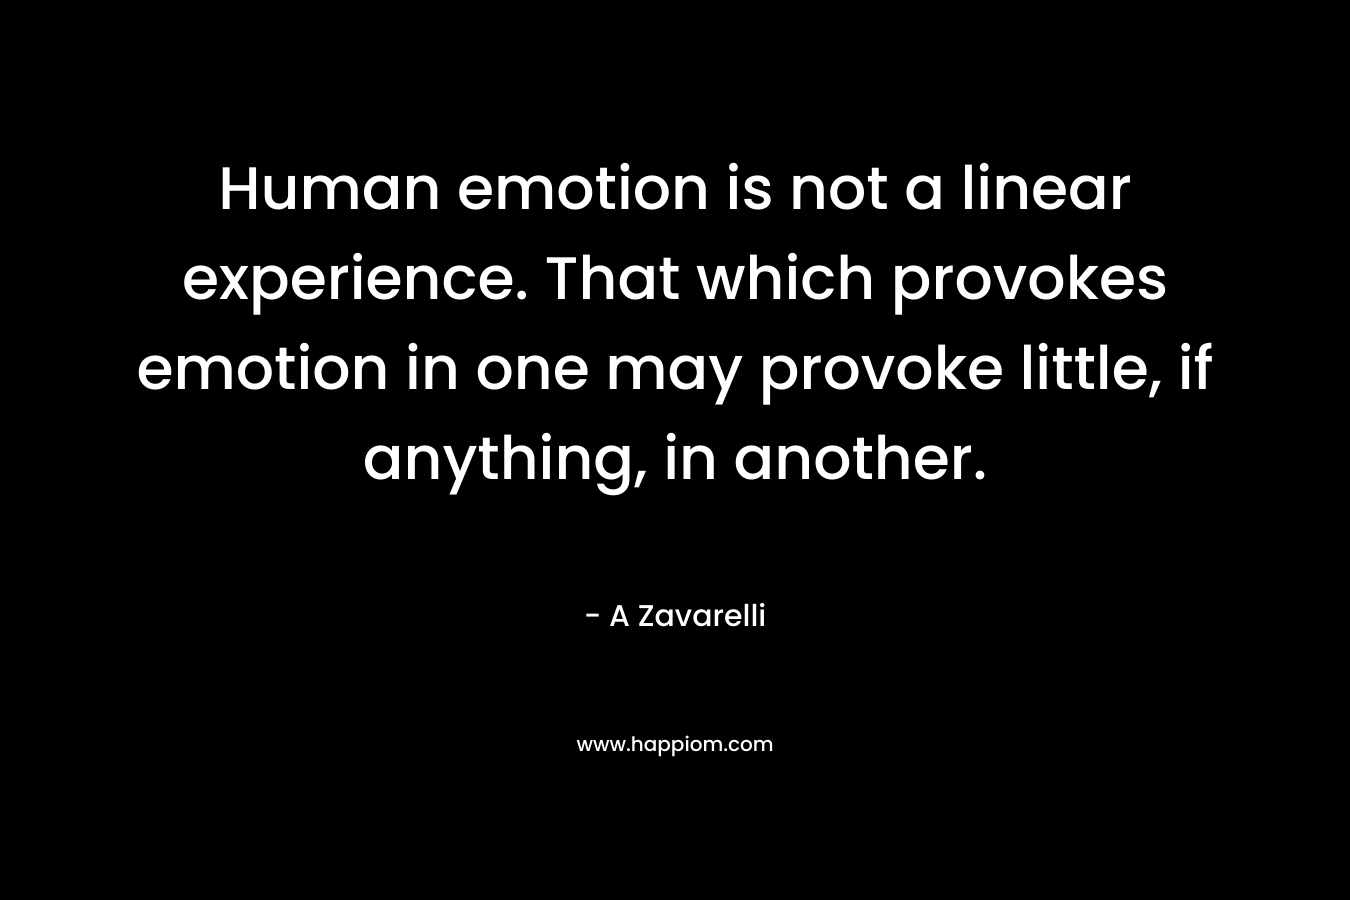 Human emotion is not a linear experience. That which provokes emotion in one may provoke little, if anything, in another. – A Zavarelli